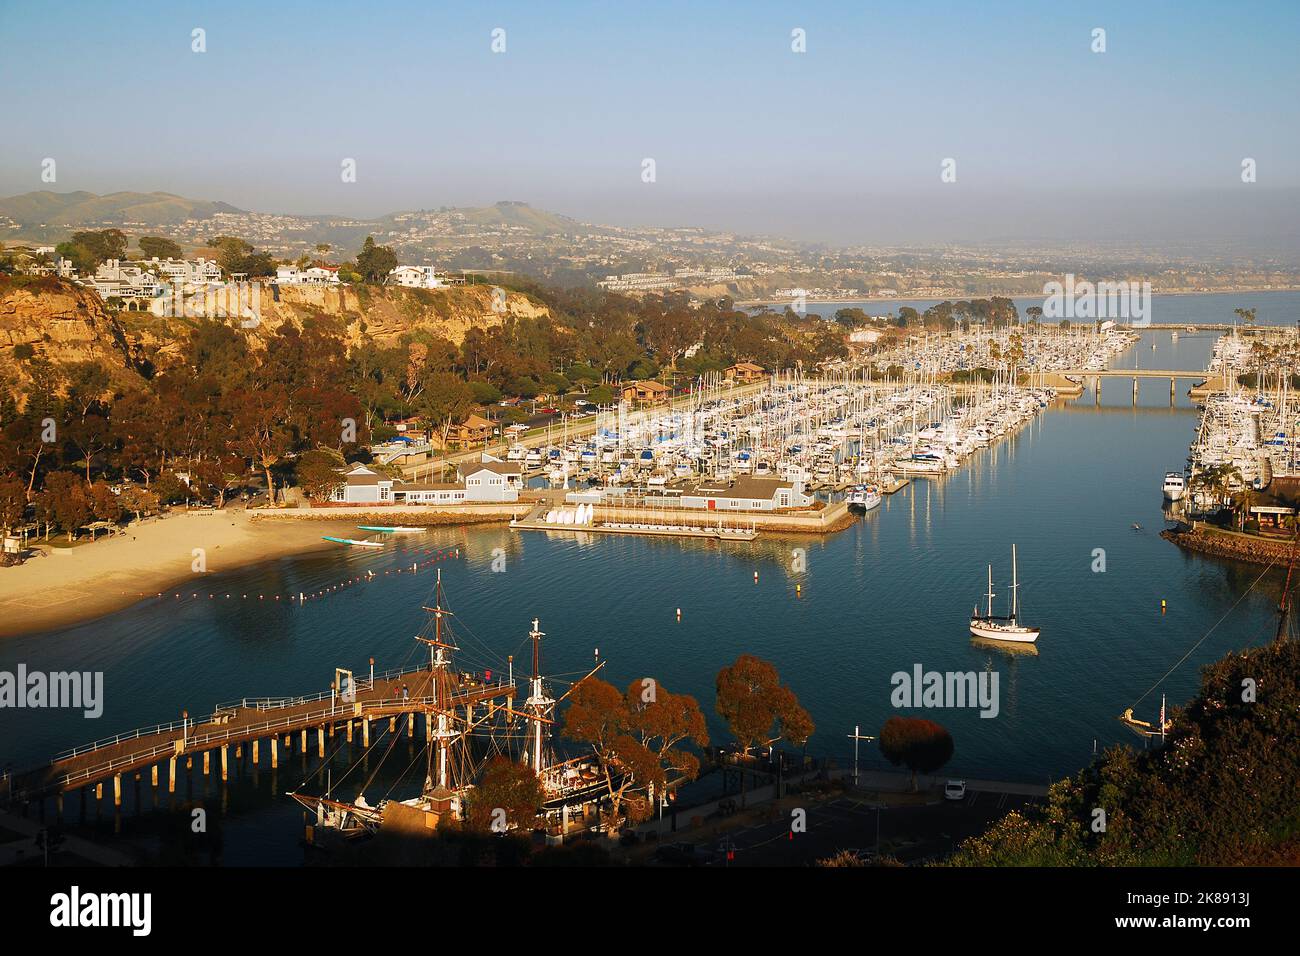 An aerial view of Dana Point, California shows the extensive marina with pleasure craft, ships and sailboats in the protective harbor Stock Photo